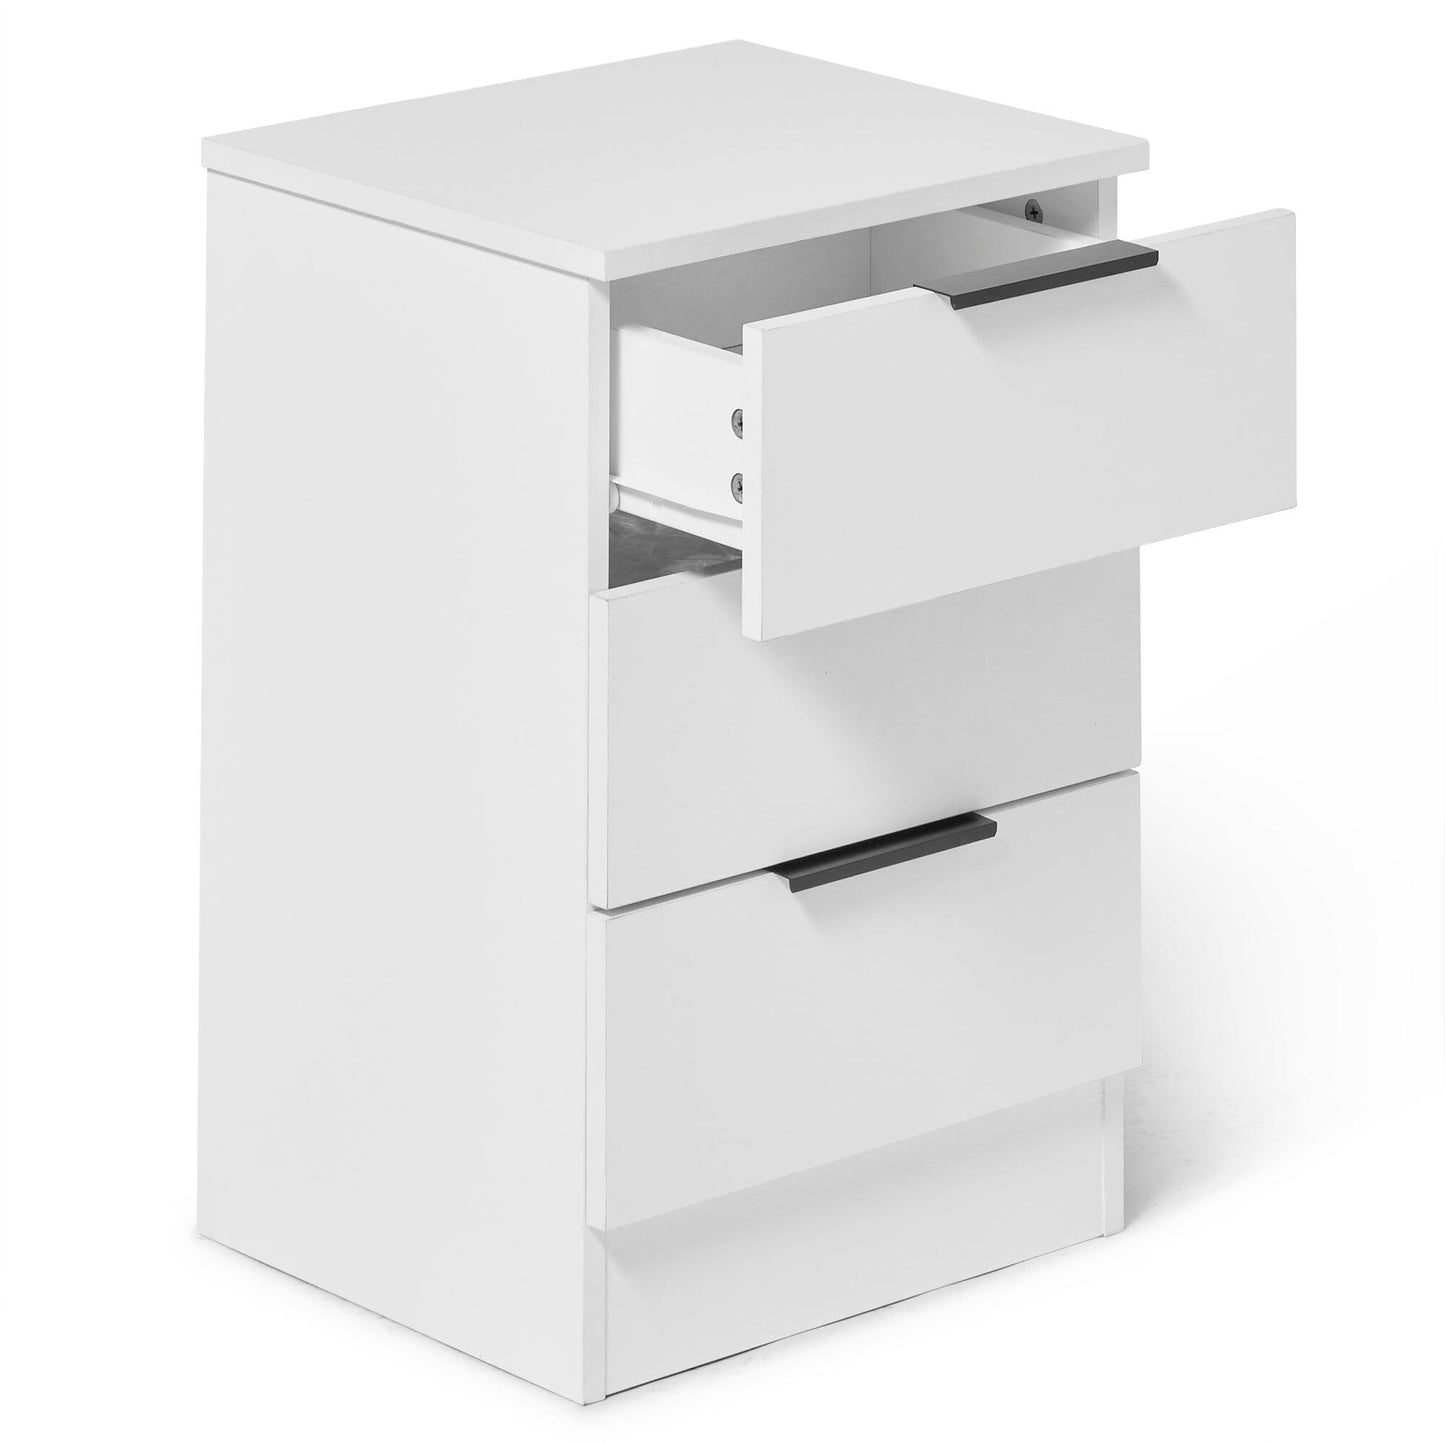 Essie 3 Piece Bedroom Set - 2 over 5 Chest of Drawers - Pure White